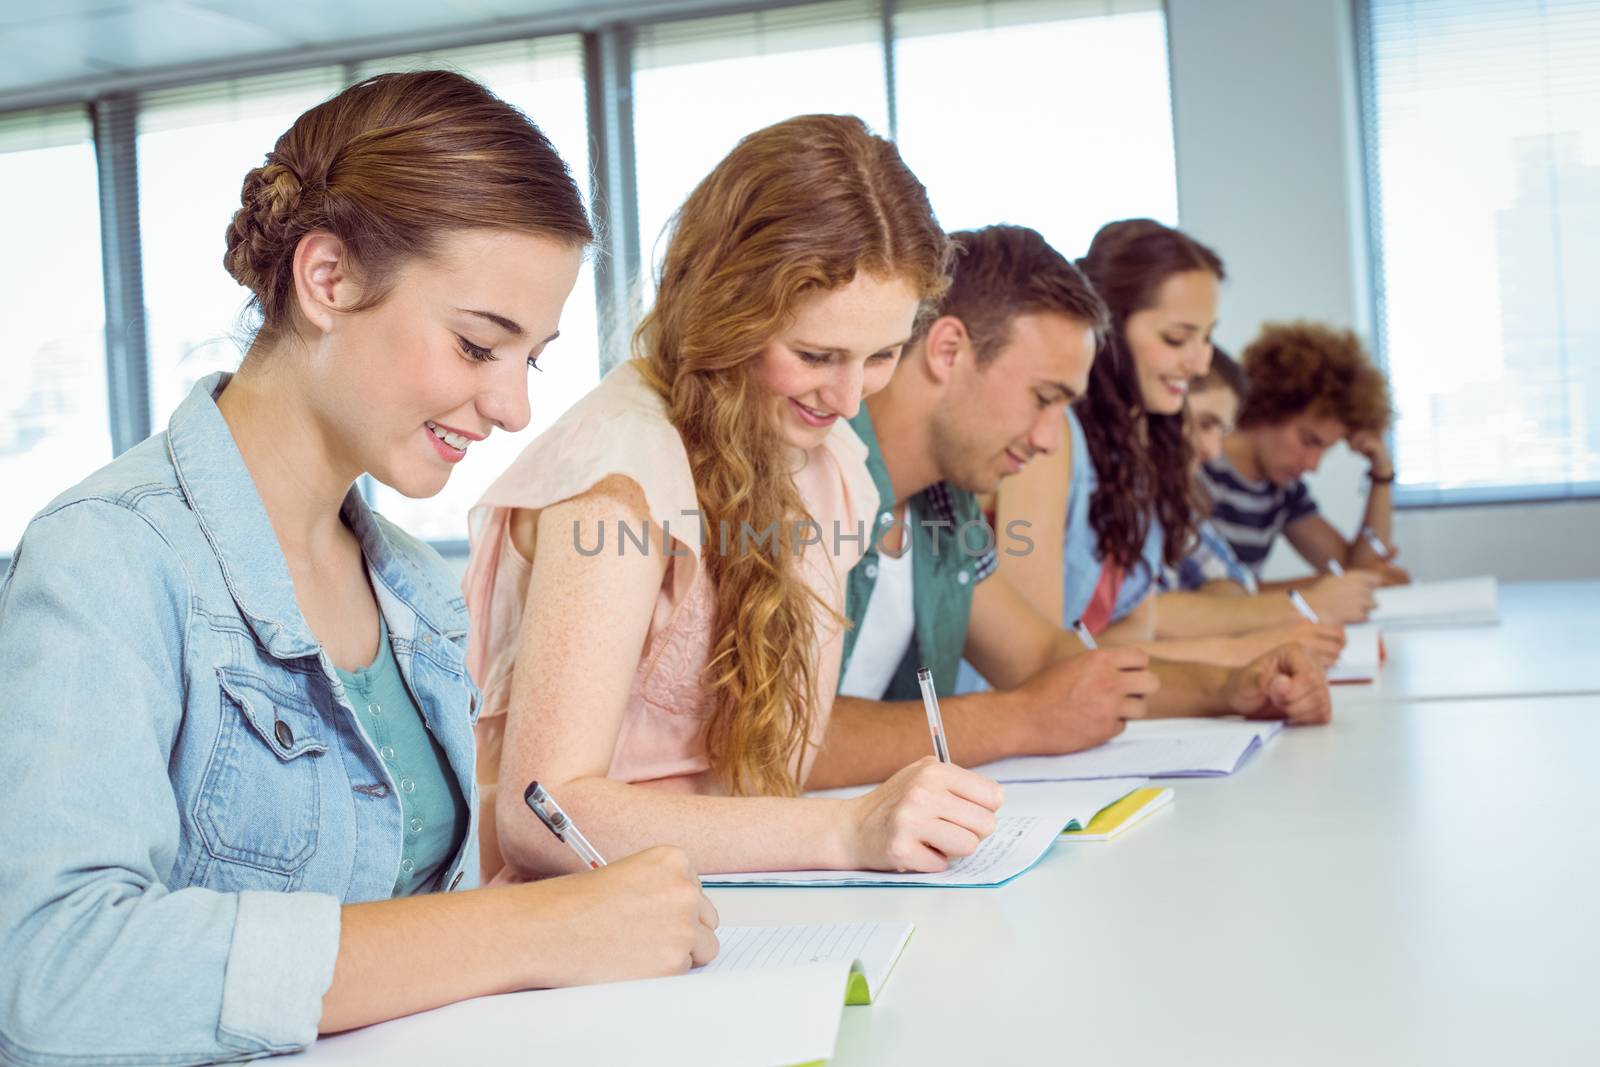 Fashion students taking notes in class by Wavebreakmedia